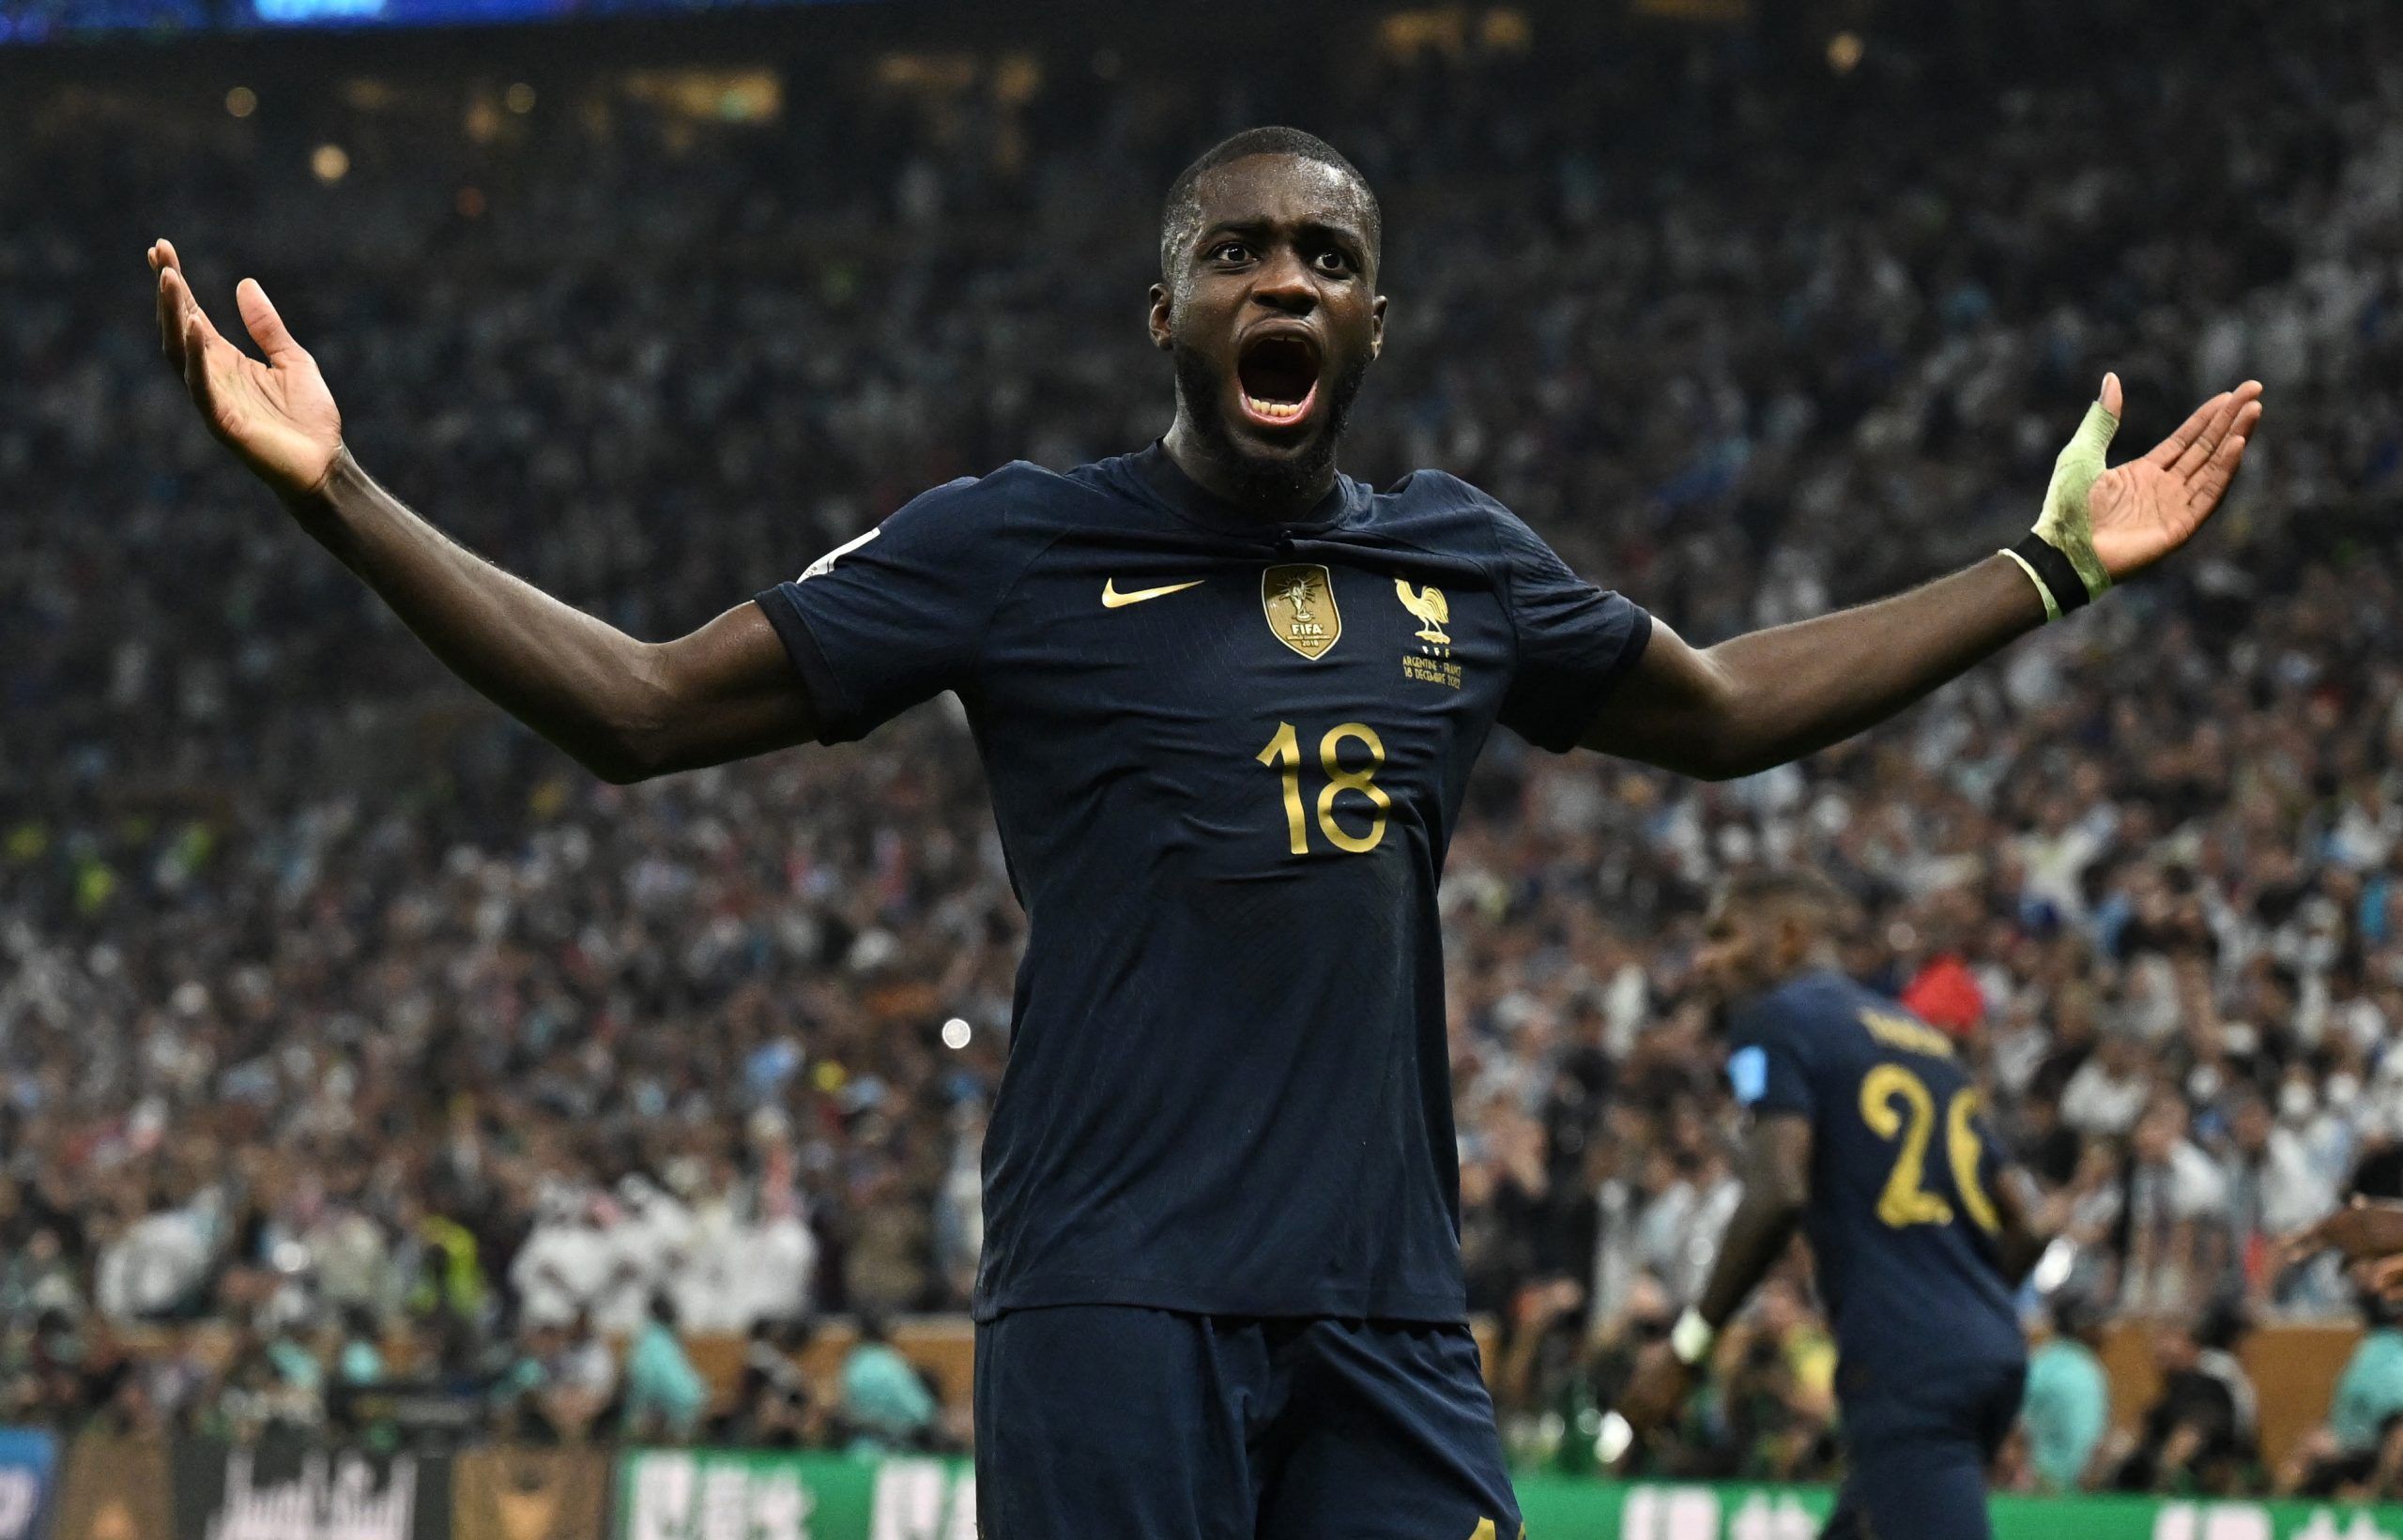 France's Dayot Upamecano celebrates their third goal scored by Kylian Mbappe vs Argentina during the World Cup final